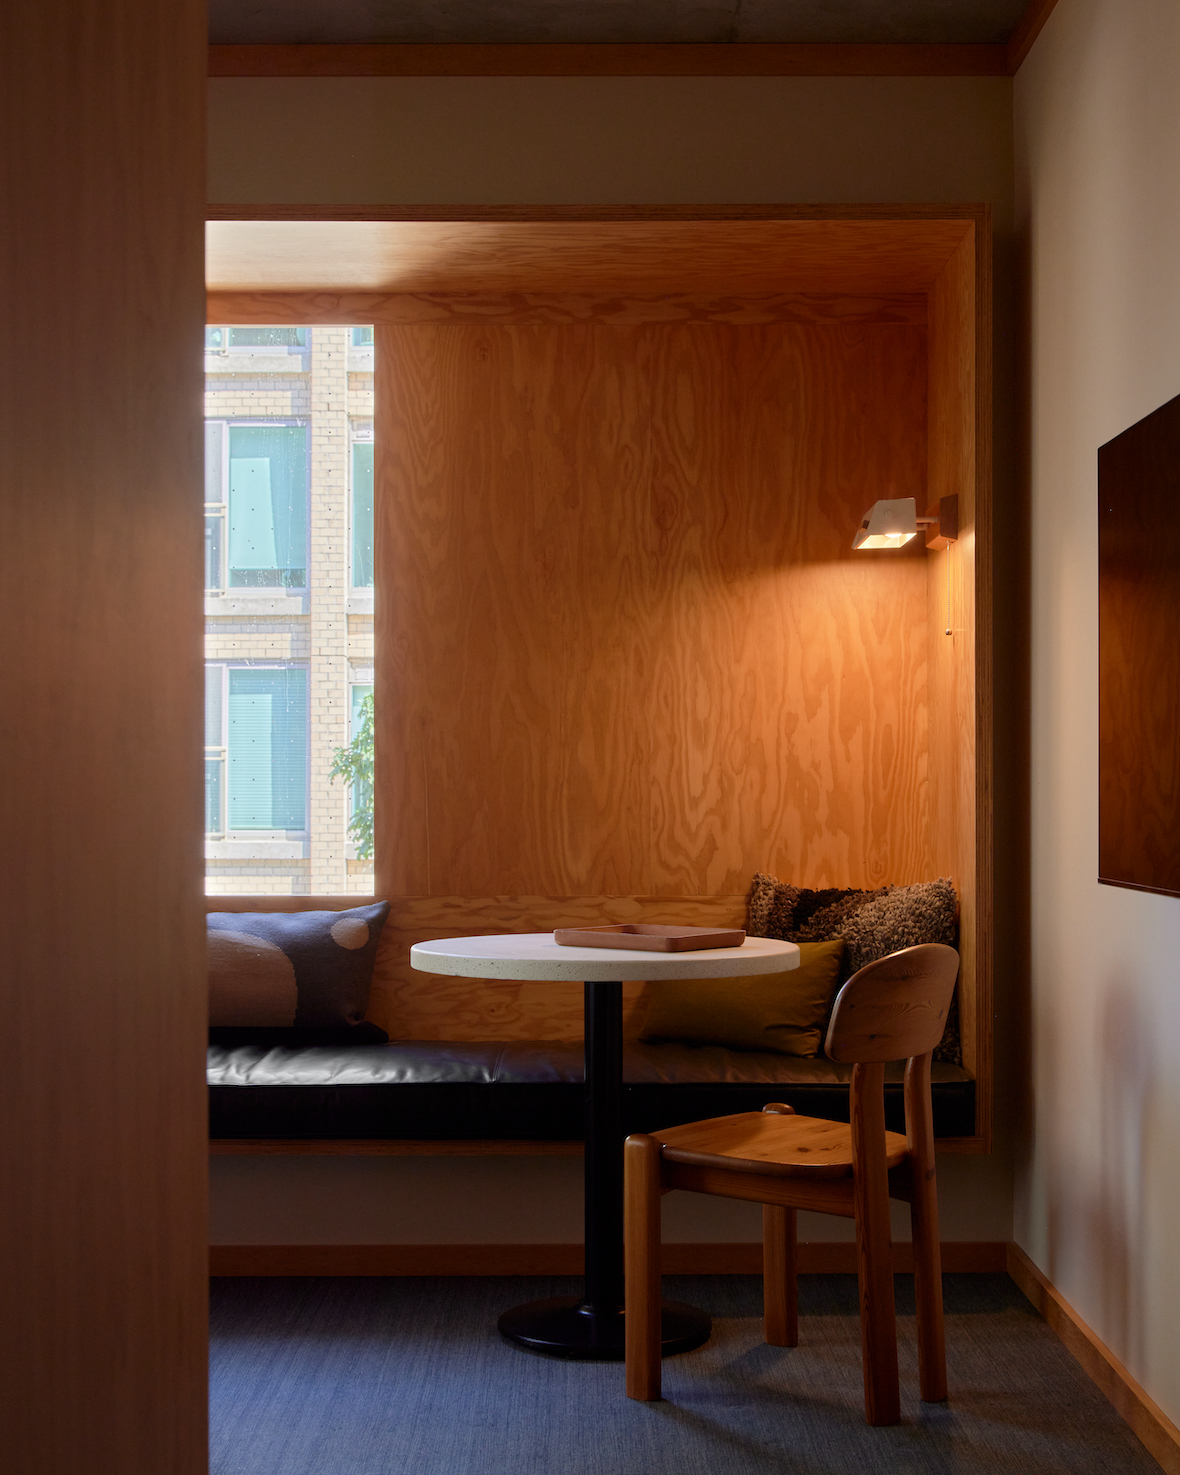 Guestrooms and public spaces designed by Shim-Sutcliffe Architects and Atelier Ace